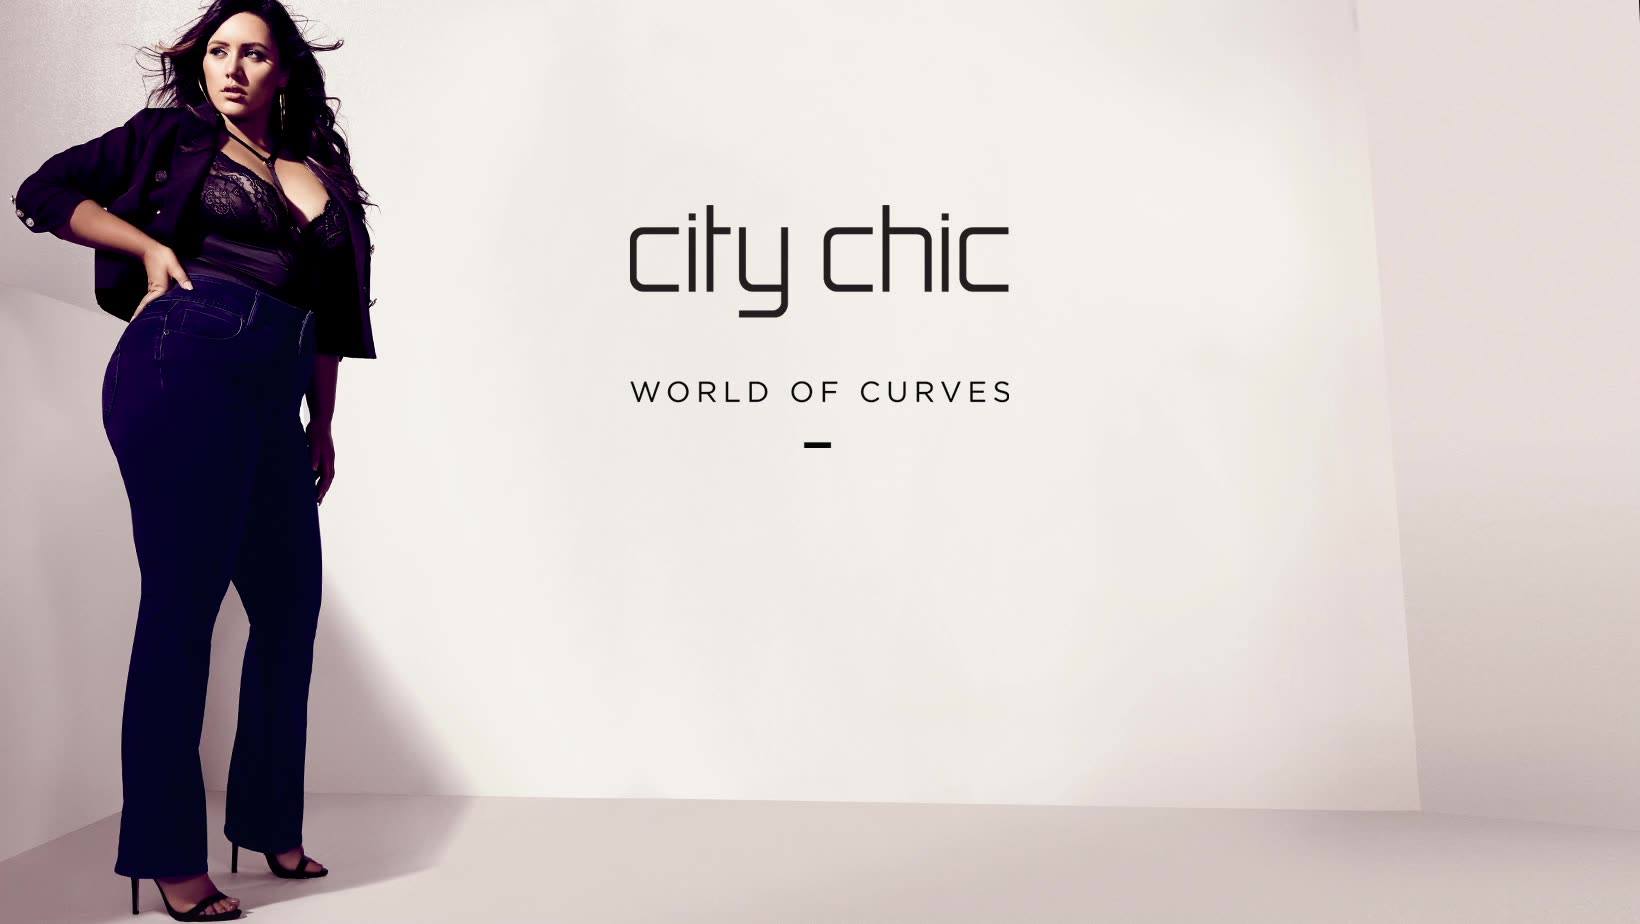 All City Chic Deals & Promotions